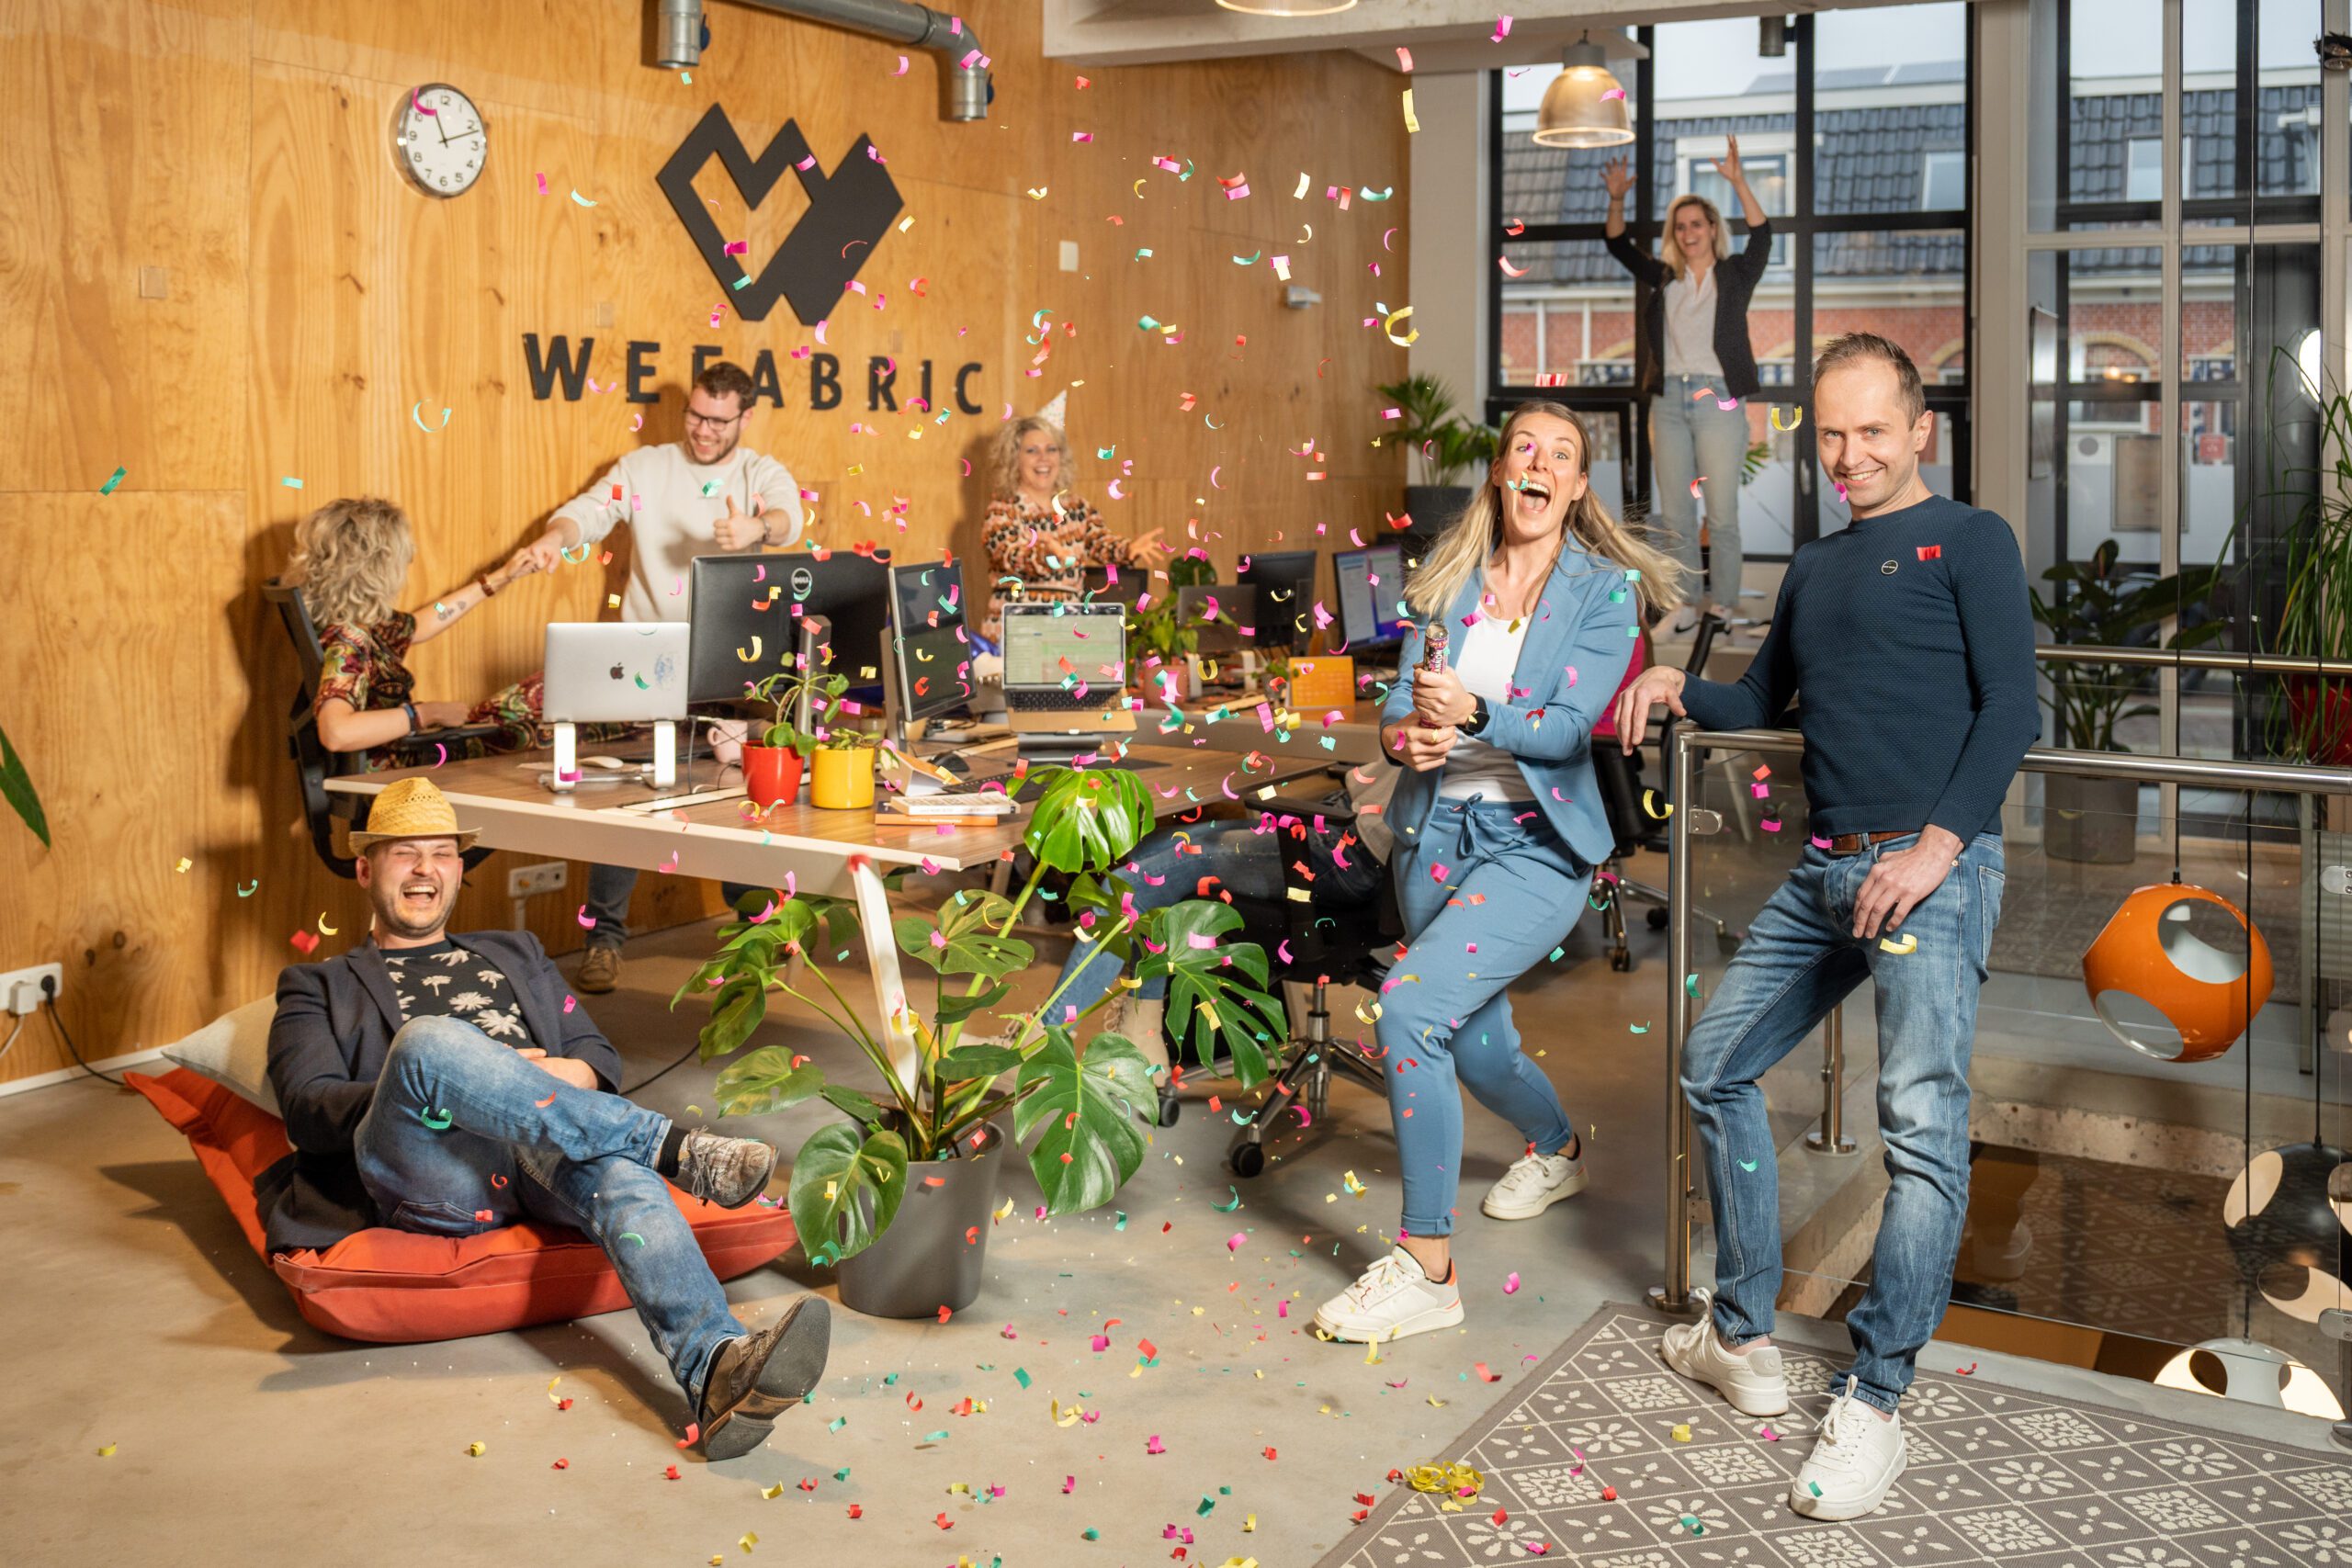 Wefabric over ons, vacatures, backend developer